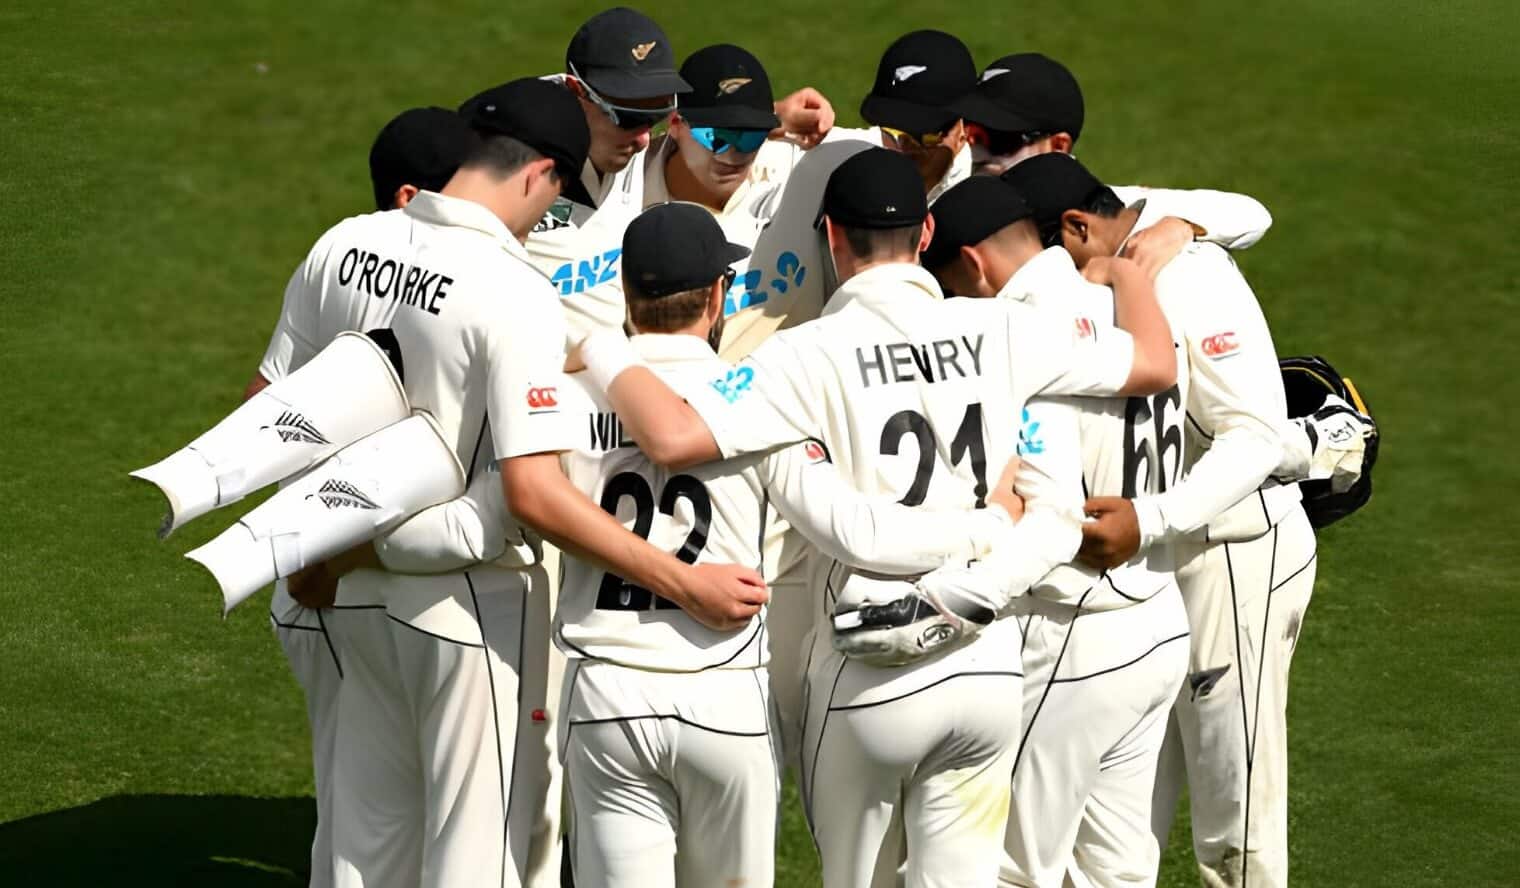 Kane Williamson's Special Knock Helps NZ Win Their First Test Series Vs SA